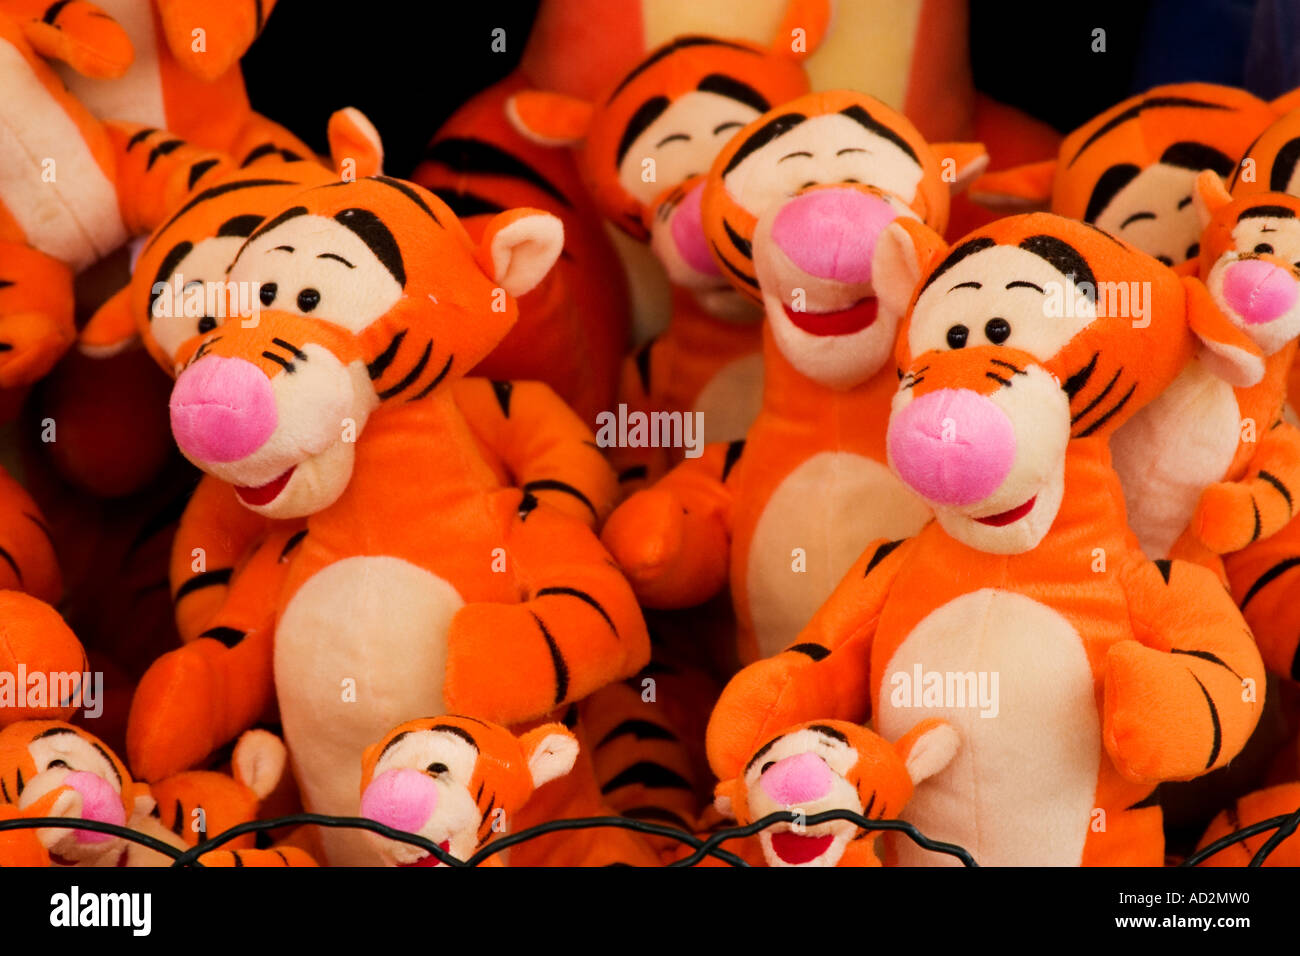 soft toy tigers piled up at a fun fair Stock Photo